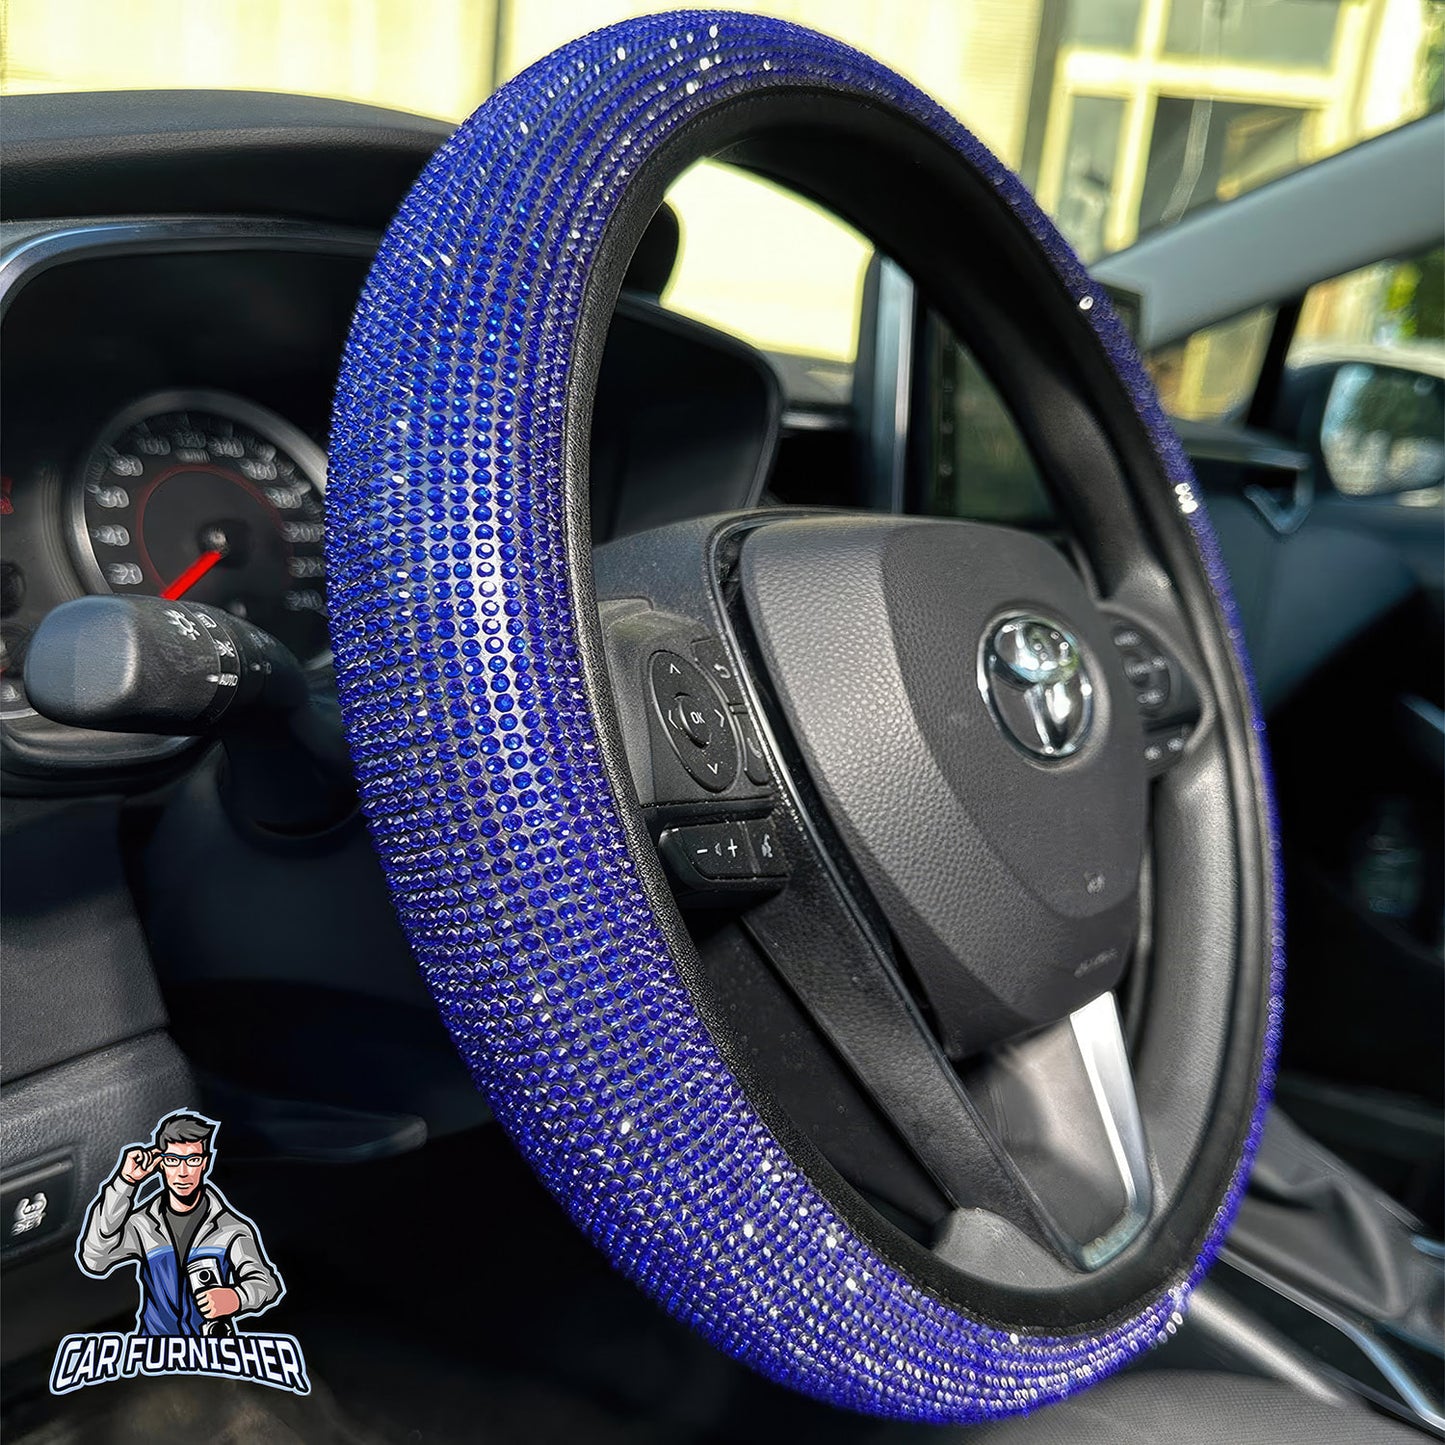 Steering Wheel Cover - Full Stone Shiny Look Blue Leather & Fabric